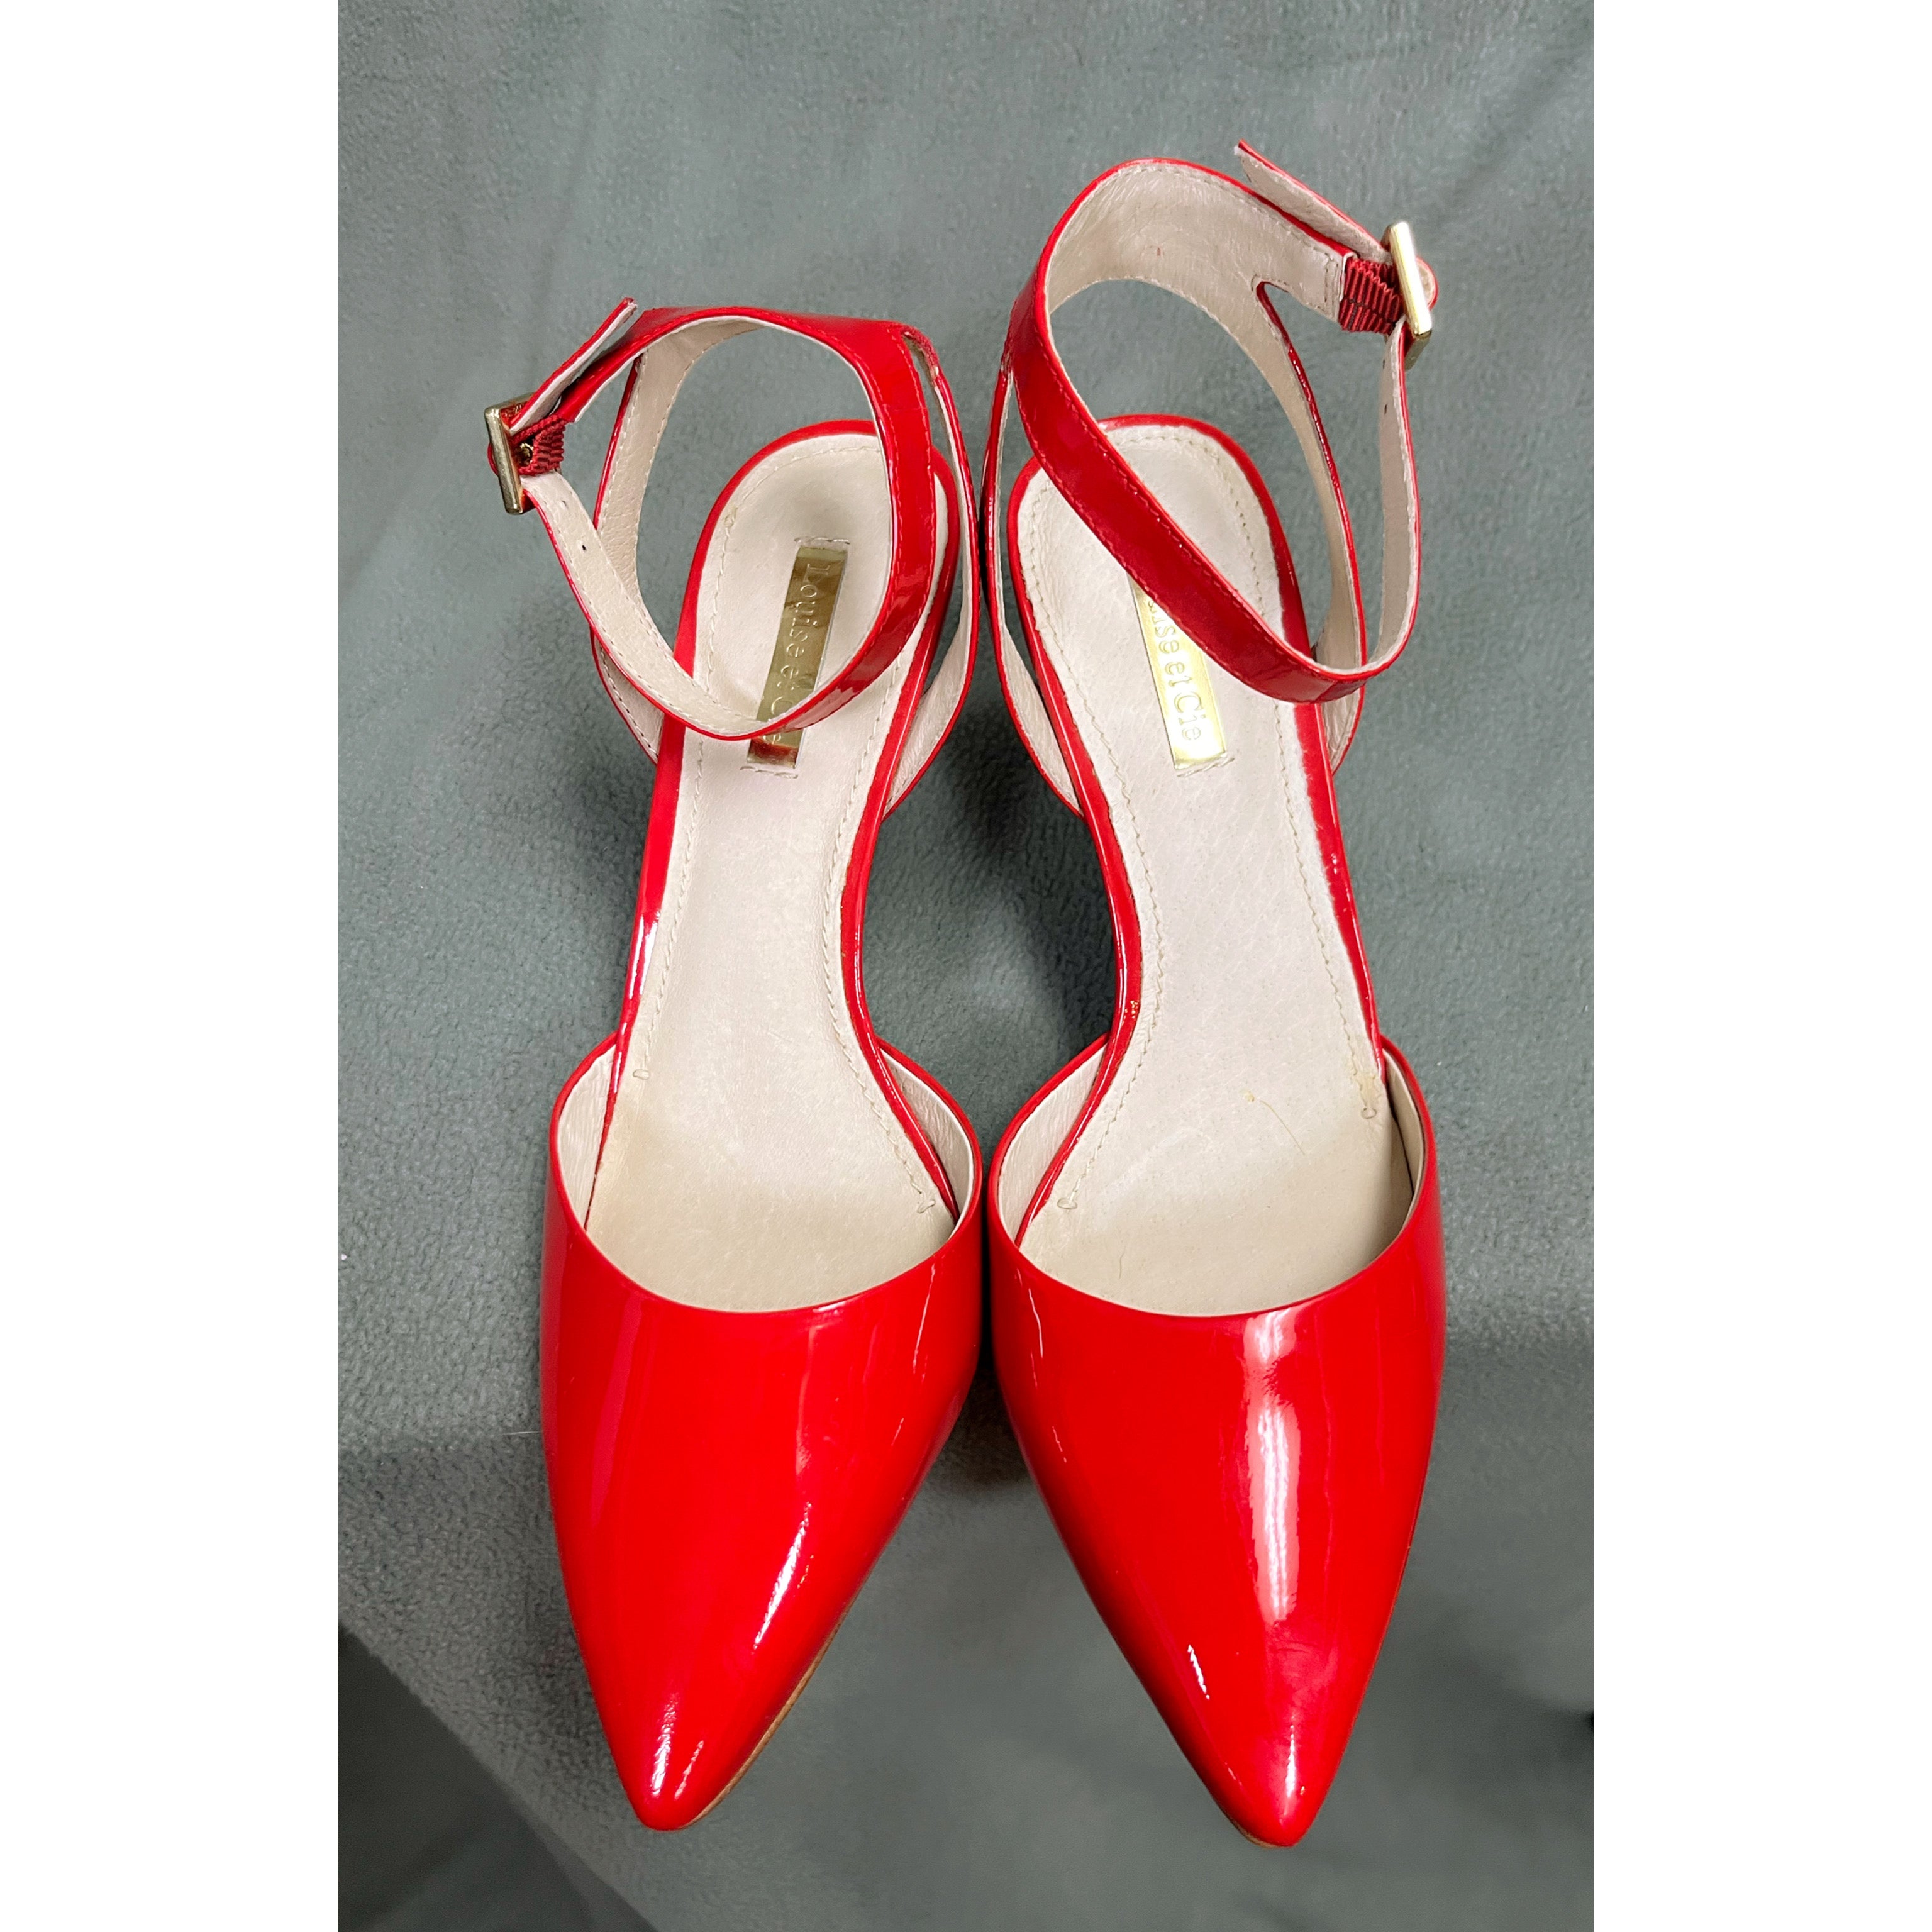 Louise & Cie red patent heel, size 8, NEW without tags